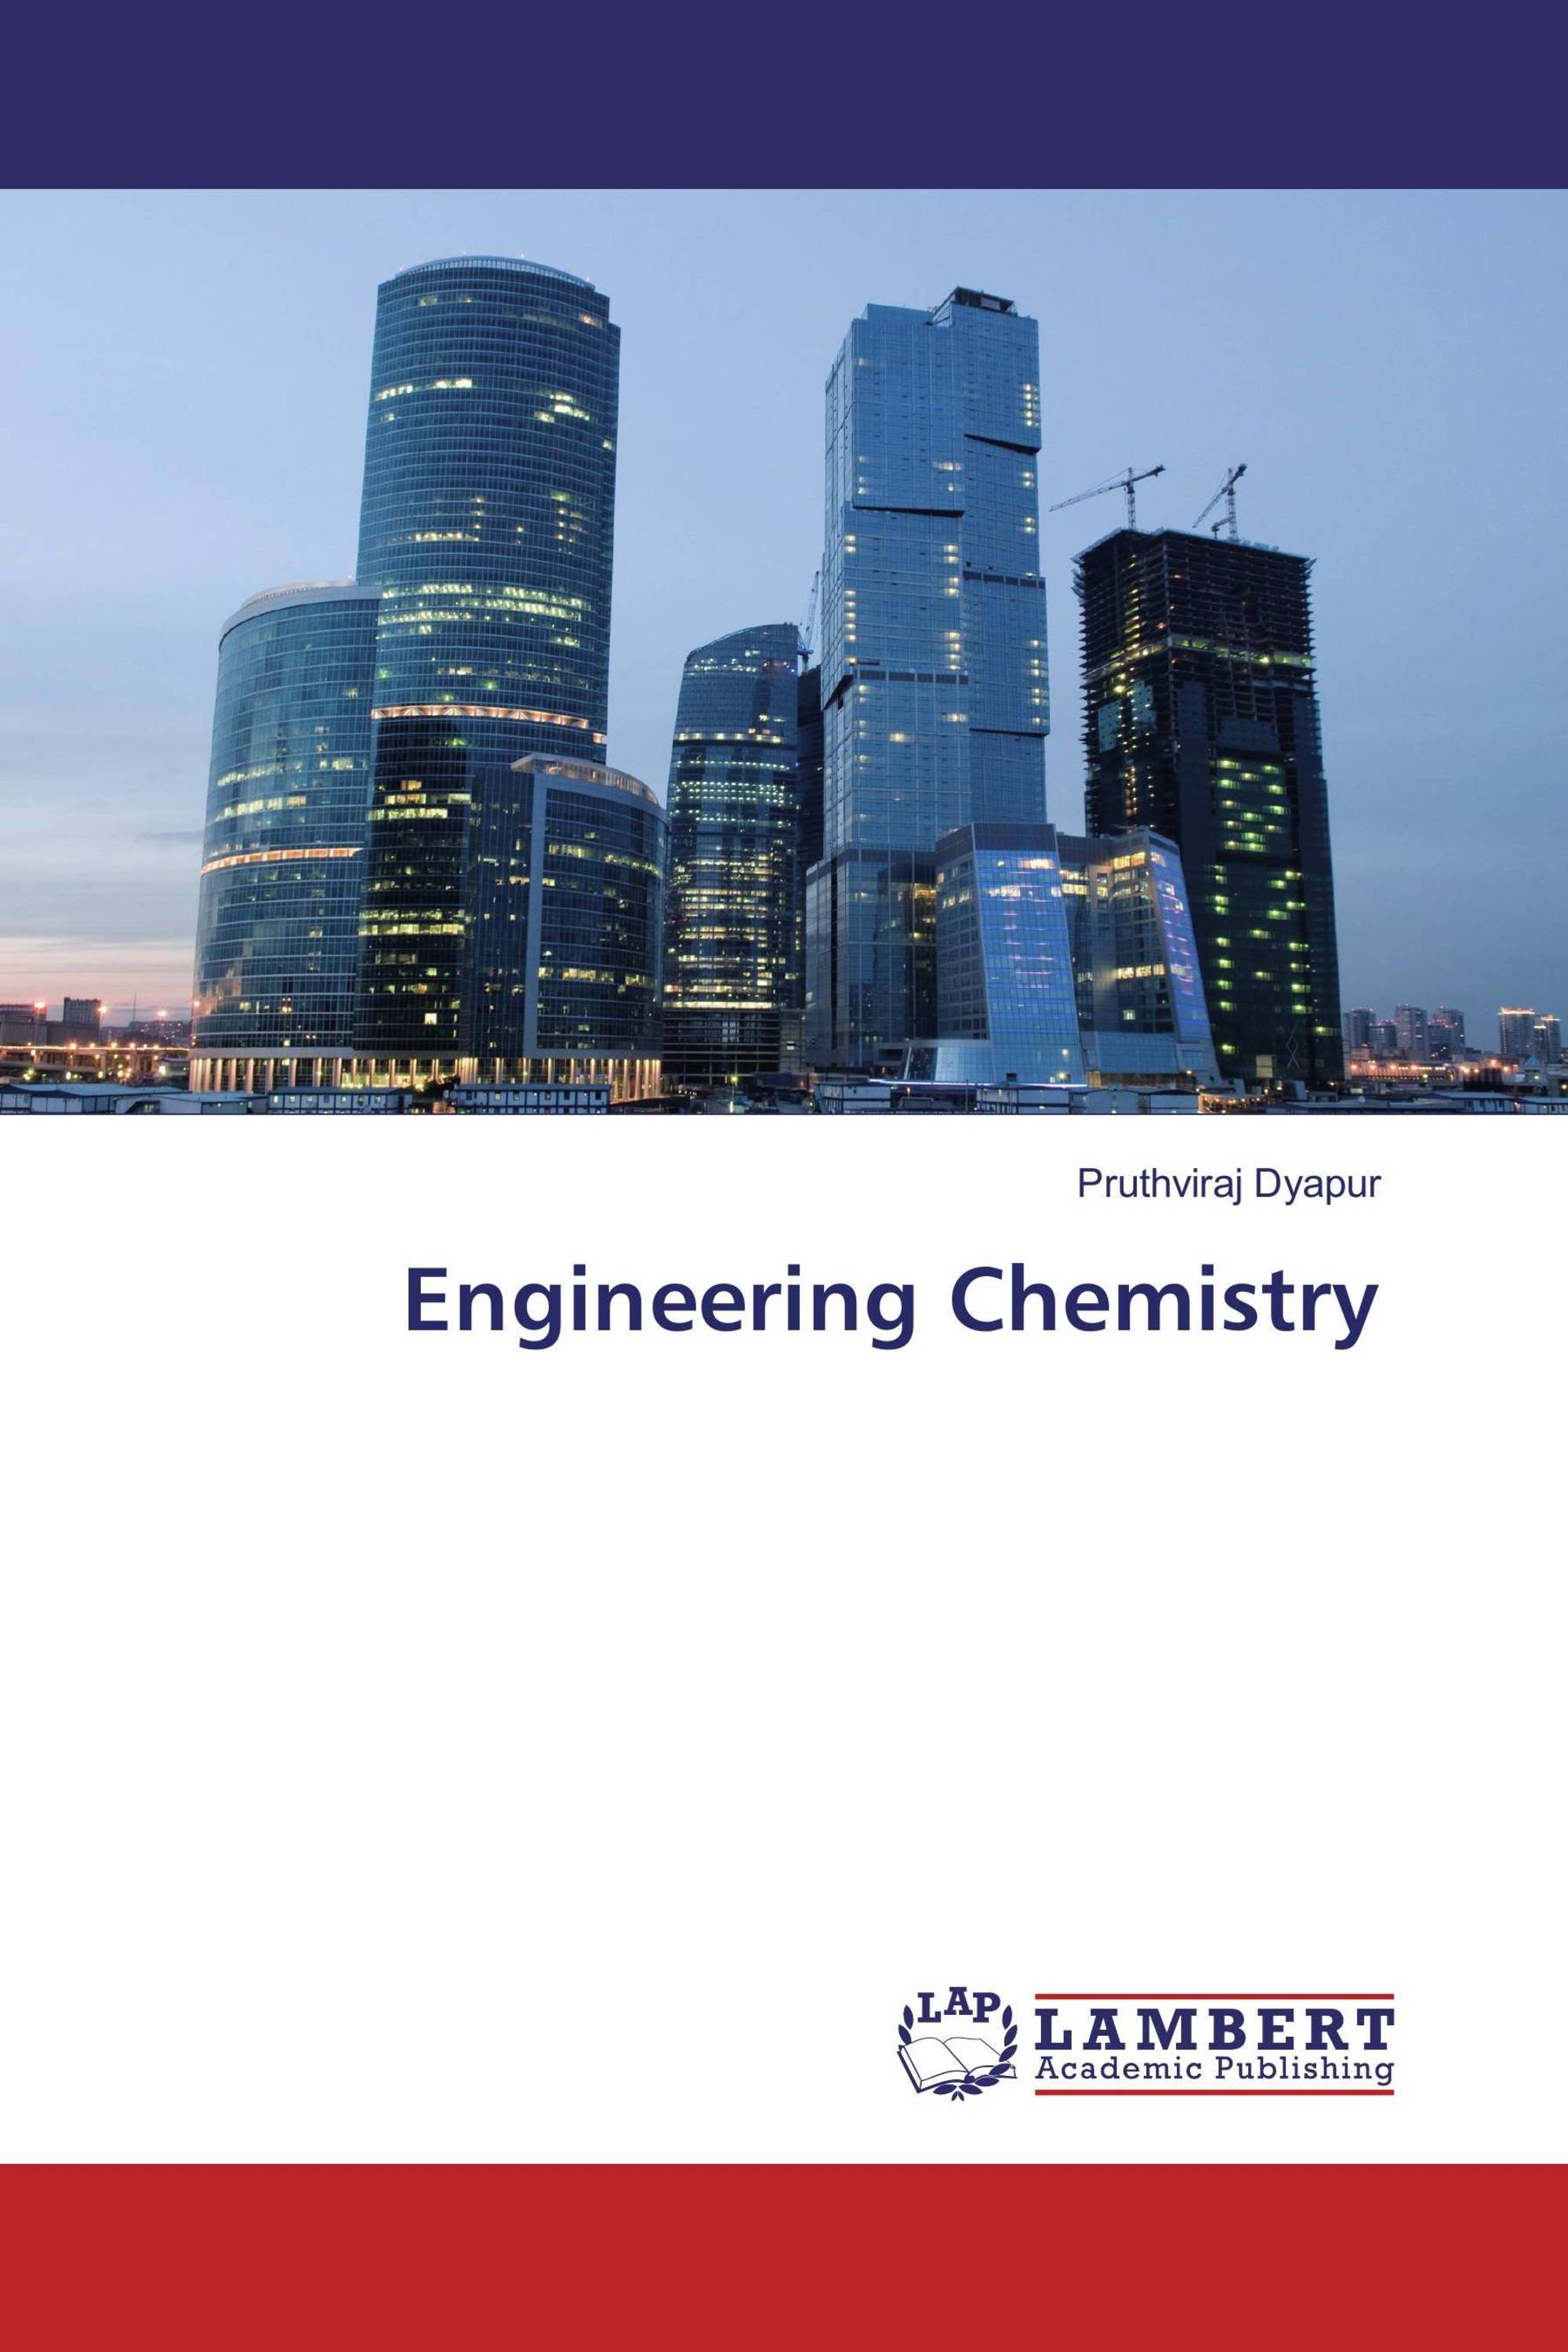 engineering chemistry notes pdf download